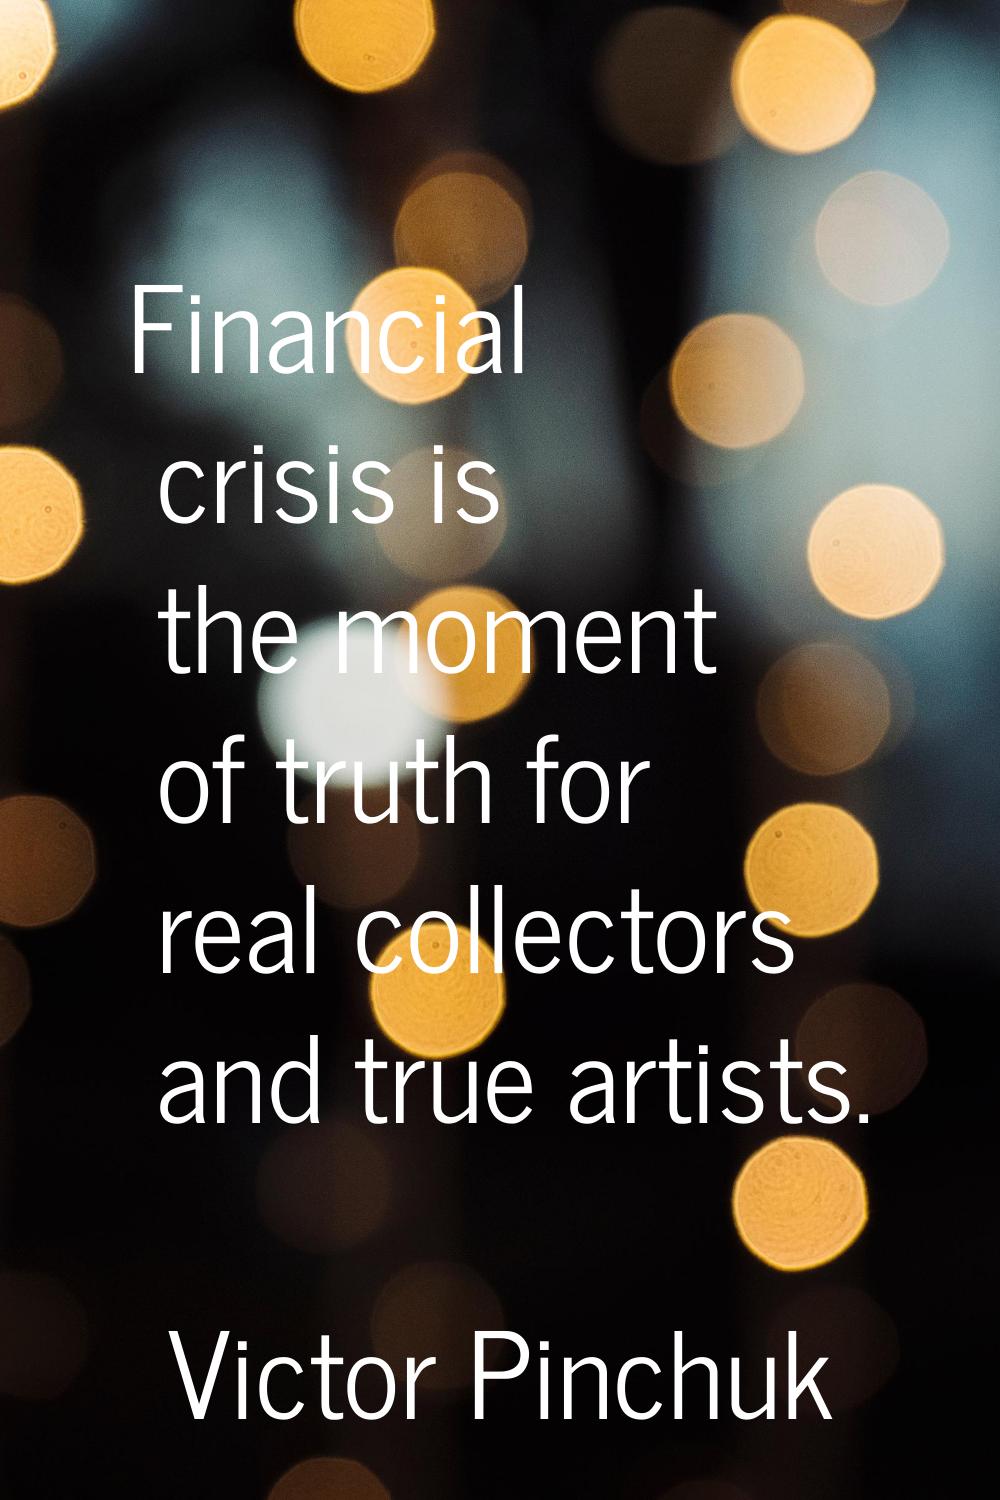 Financial crisis is the moment of truth for real collectors and true artists.